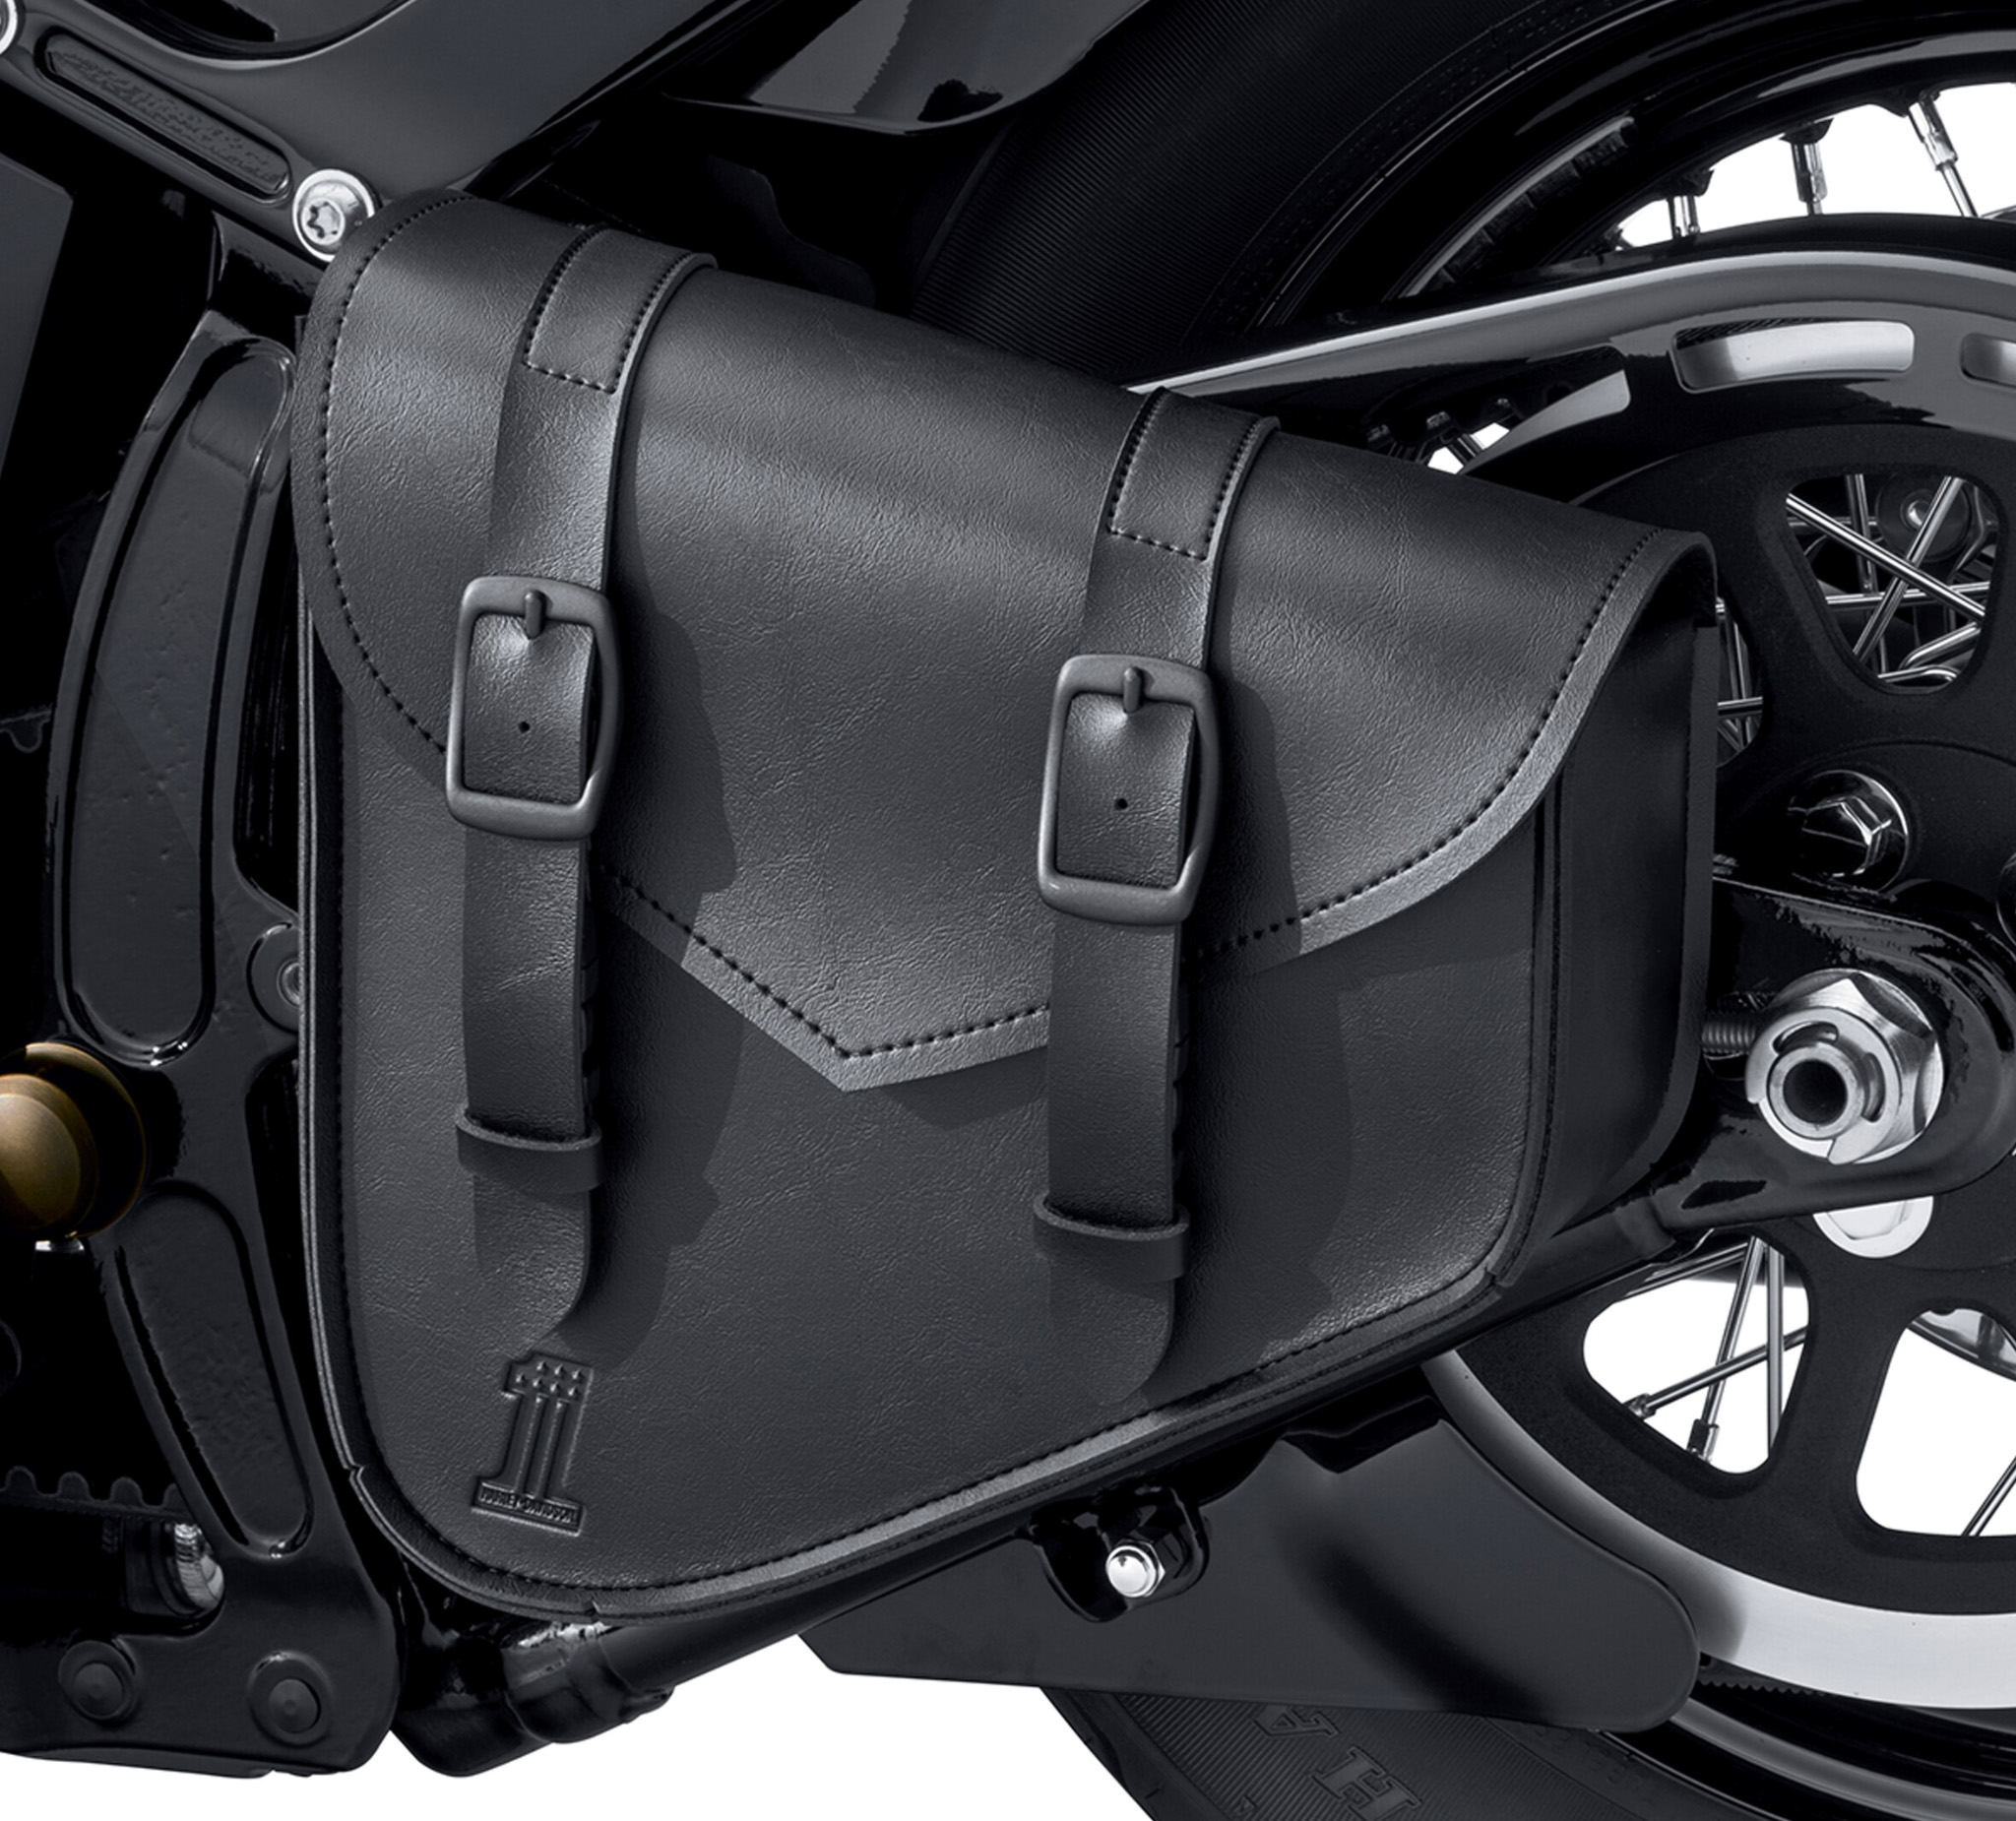 LABLT Black Motorcycle Saddlebags Luggage Tool Bag Replacement for Harley Sportster 883 Dyna Softail 